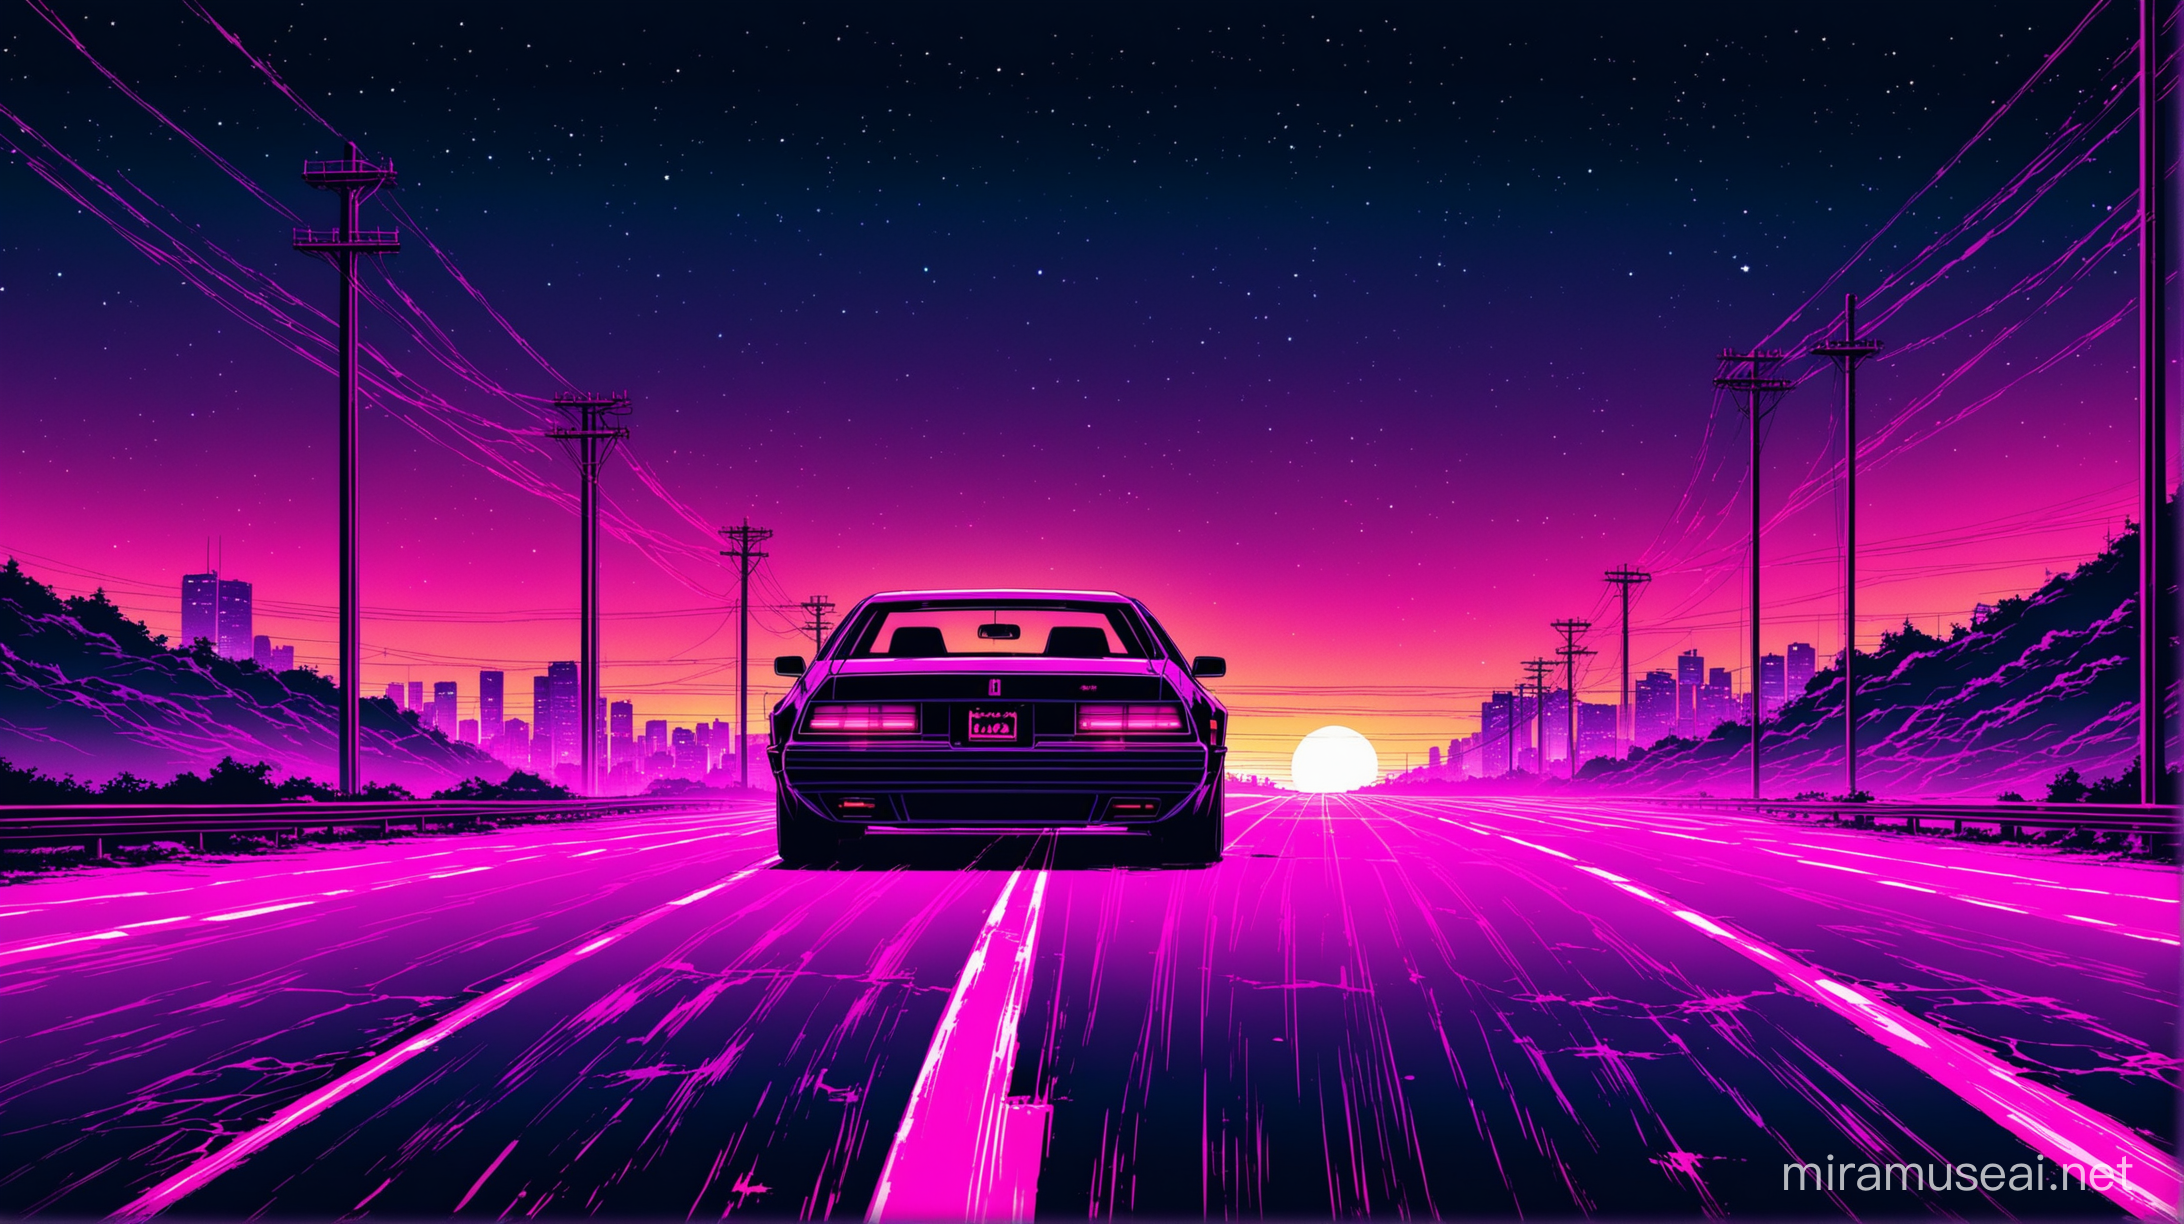 synthwave driveway
highway
abandonned city
dystopia 
night
dark
synthwave car